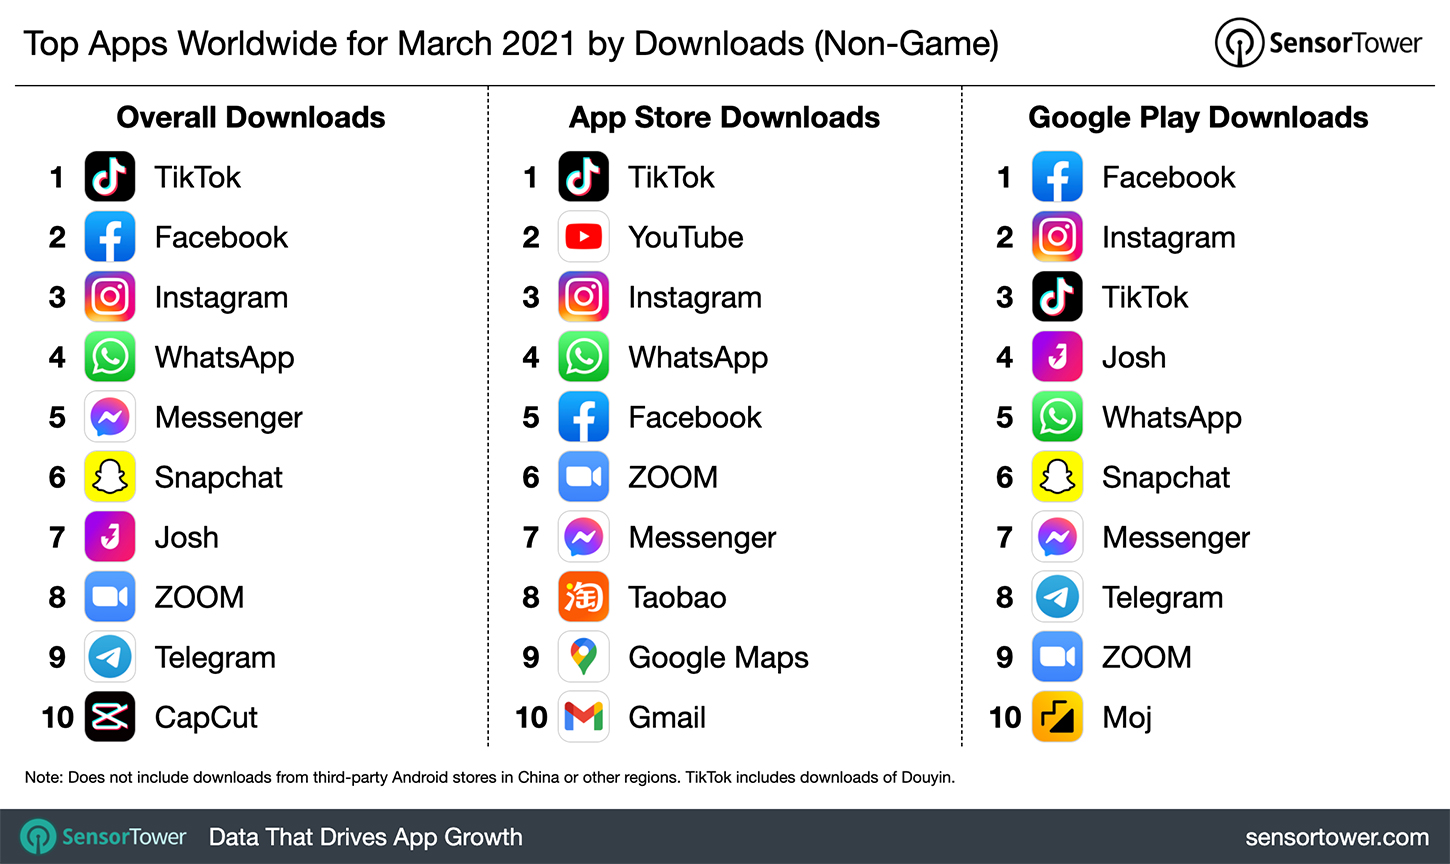 Top Apps Worldwide for March 2021 by Downloads